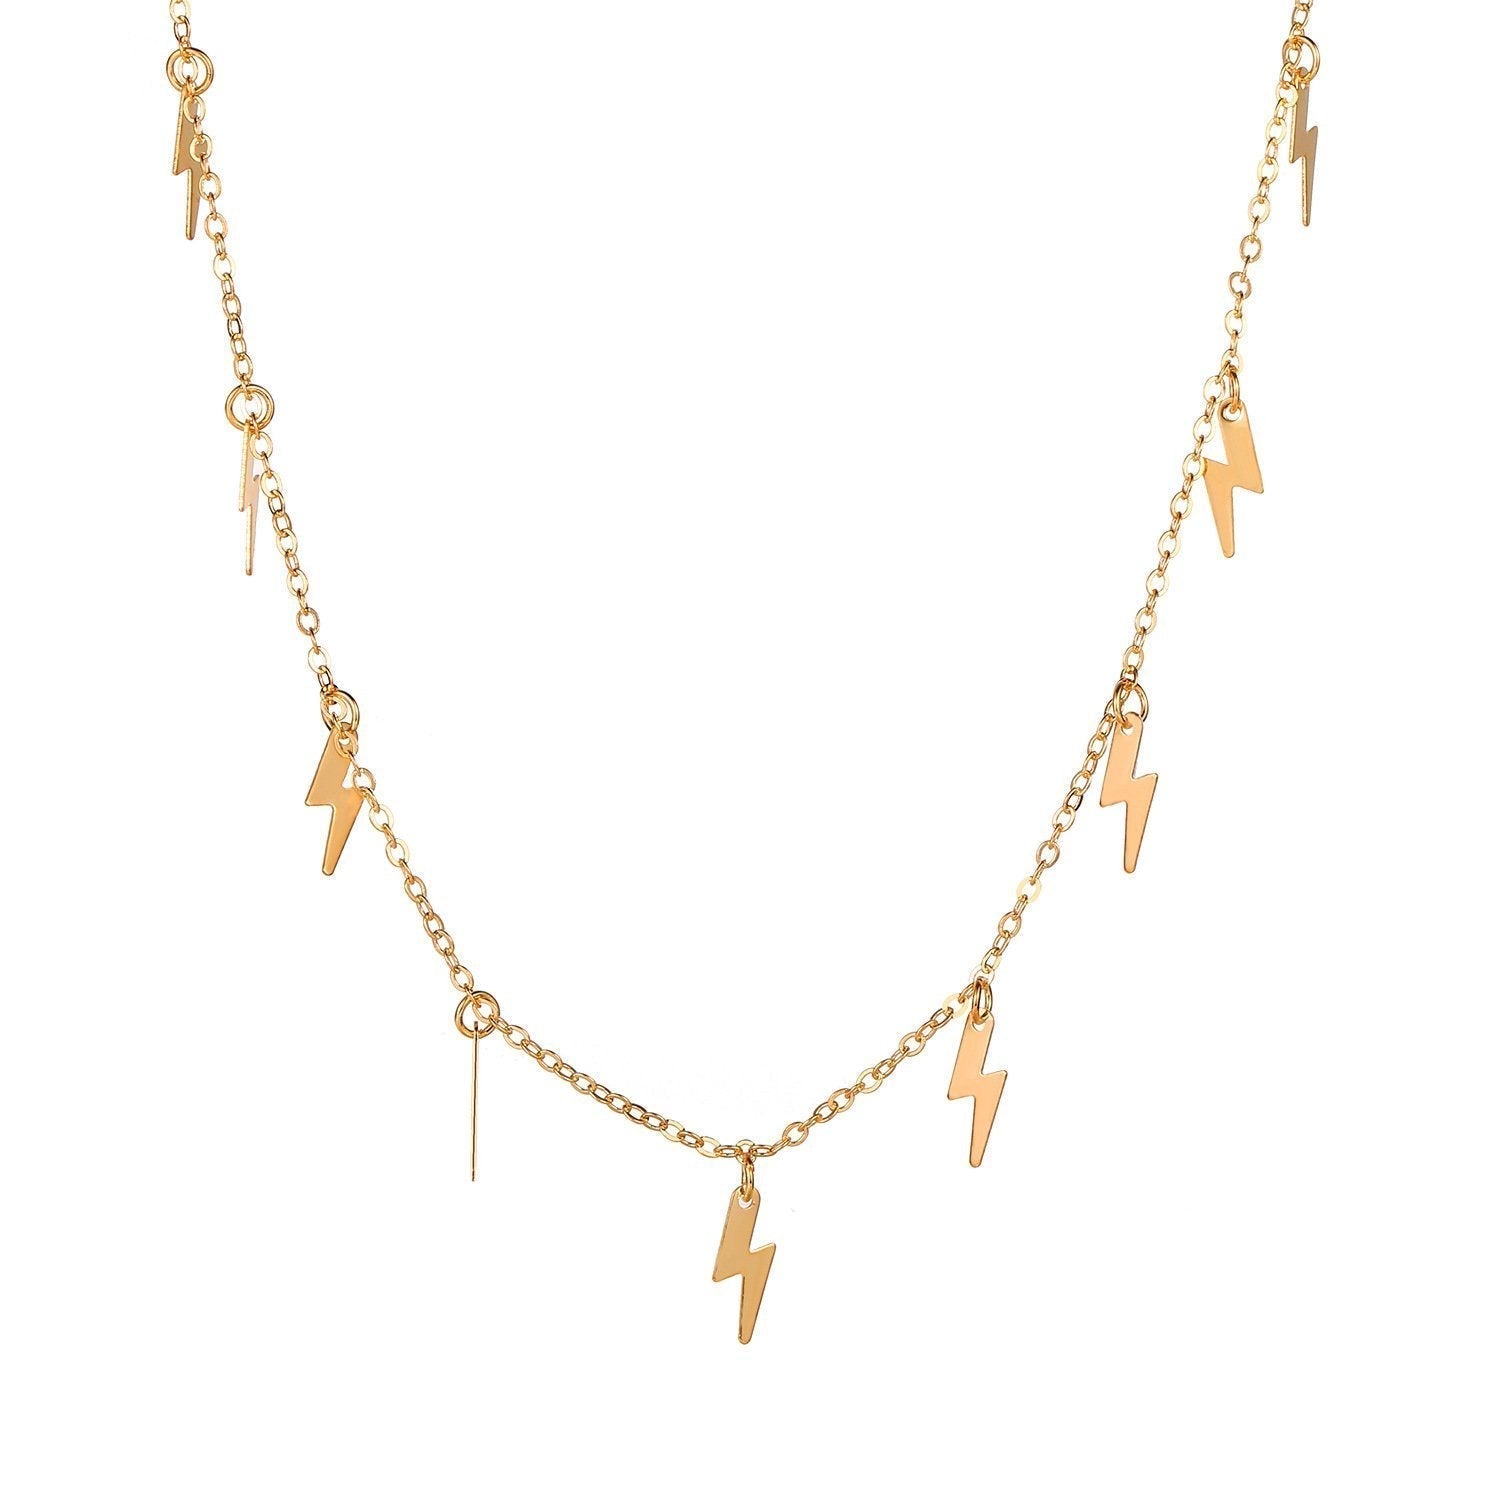 Lighting Bolt Necklace  18K Gold Plated Necklace in 18K Gold Plated ITALY Design Elsy Style Necklace